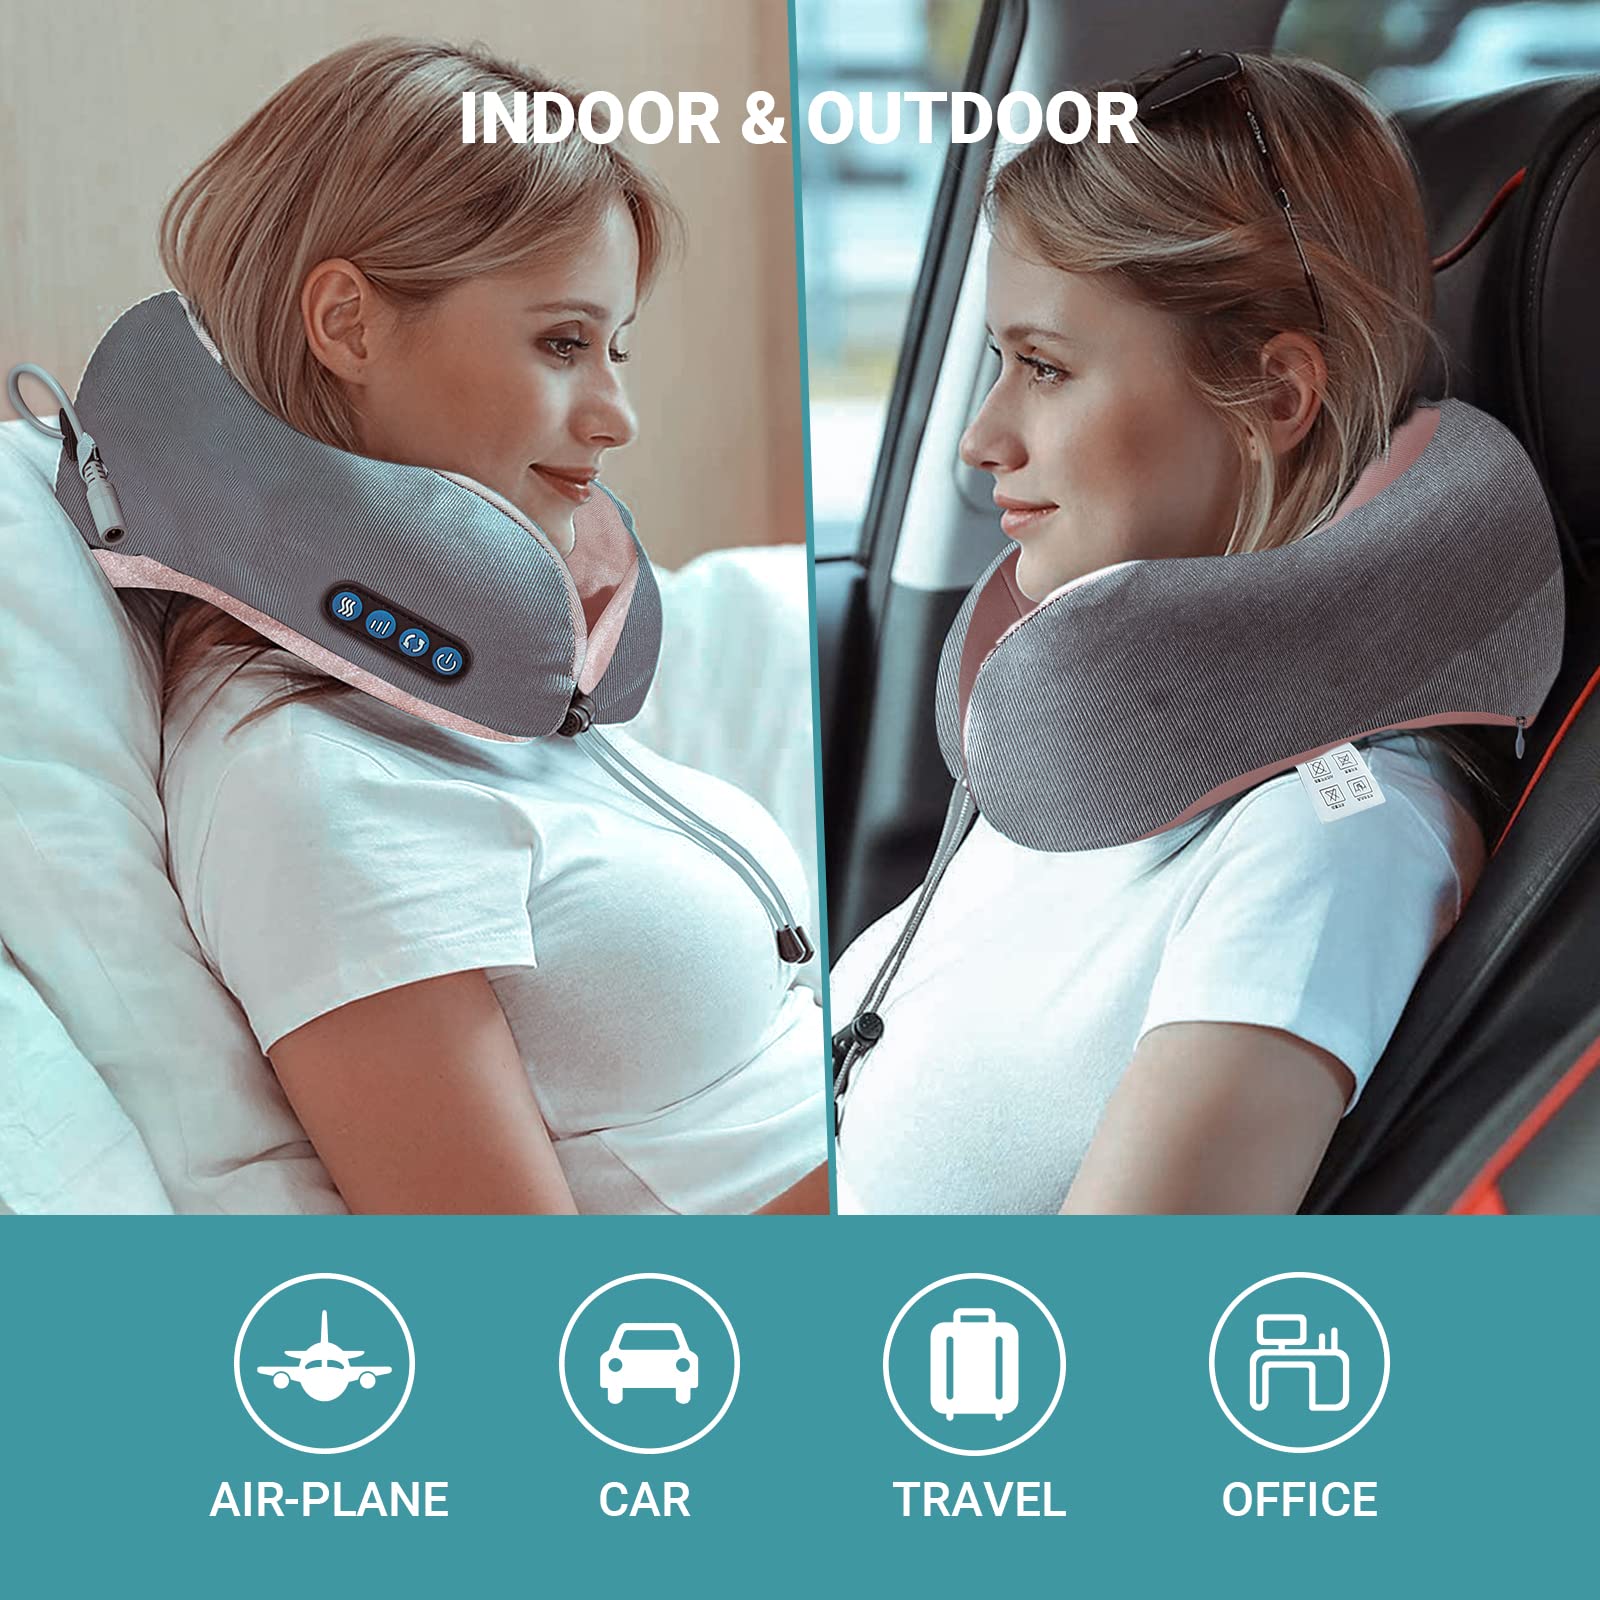 EEZEE Neck Massage Pillow with 3 Vibrating Modes for Neck, Back and Leg Relax and Support, Travel Neck Pillow with Heat U-Shaped Memory Foam Pillow for Home Office Airplane Car